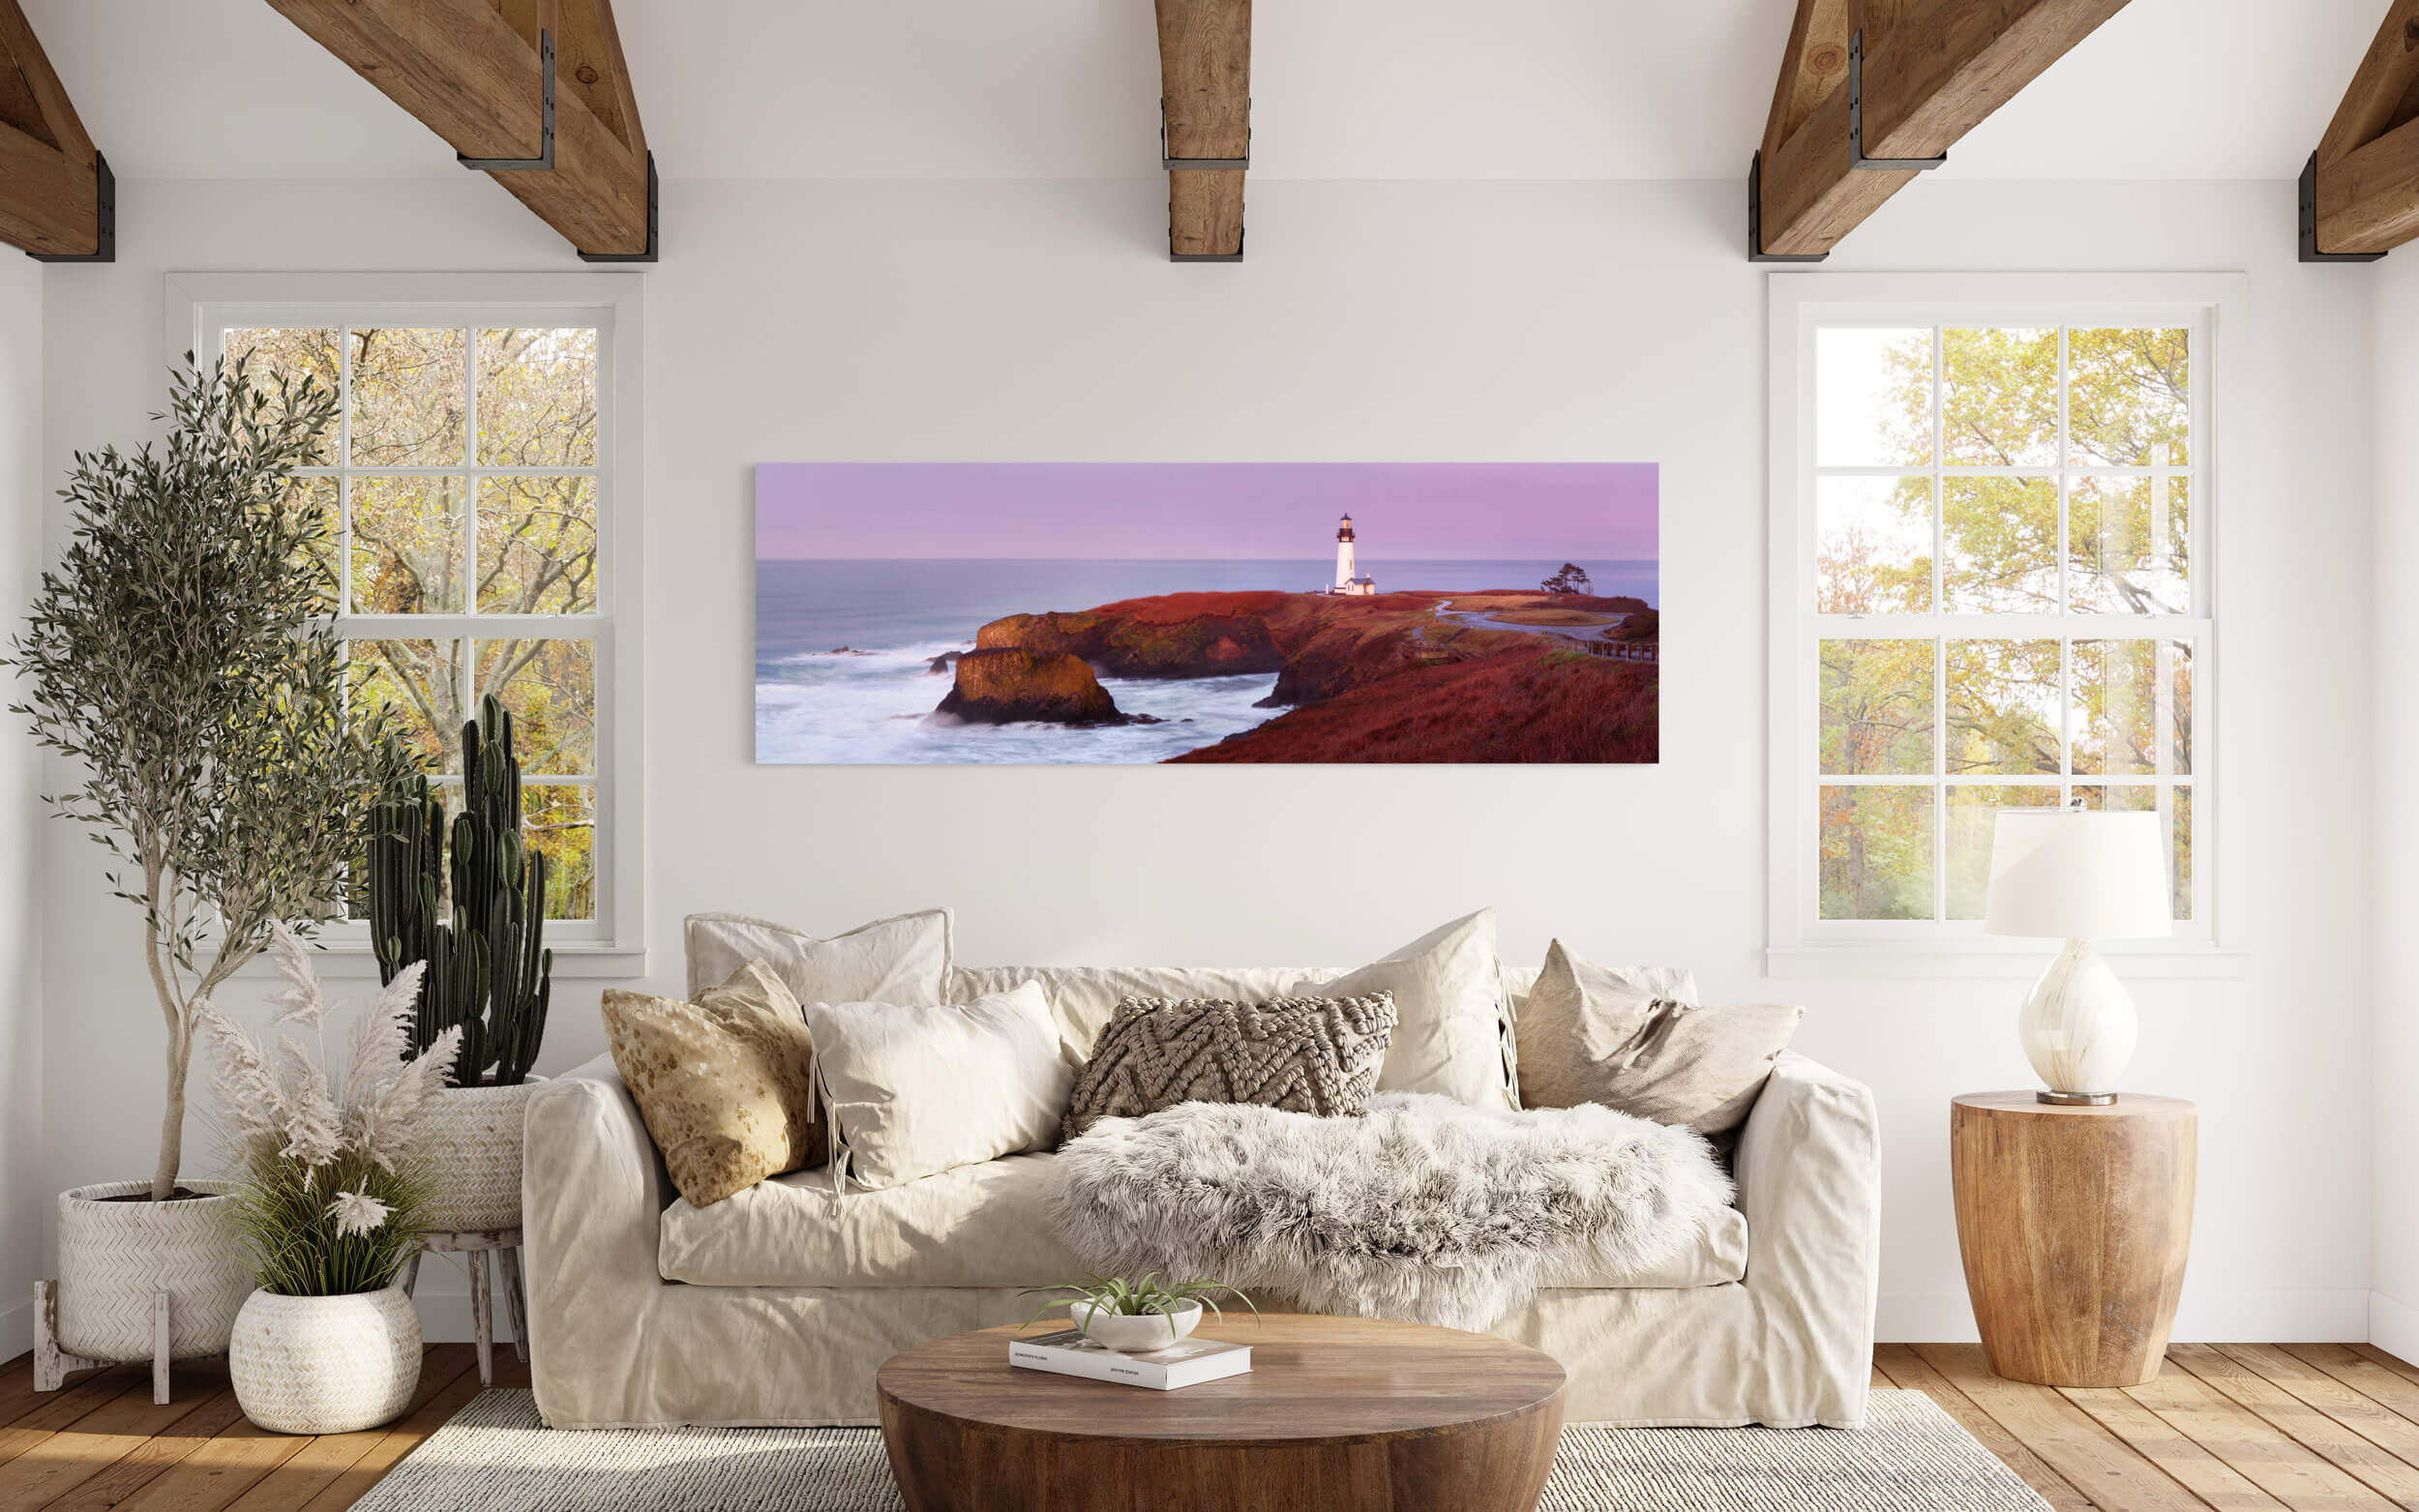 A piece of Oregon art showing the Yaquina Head Lighthouse in Oregon hangs in a living room.